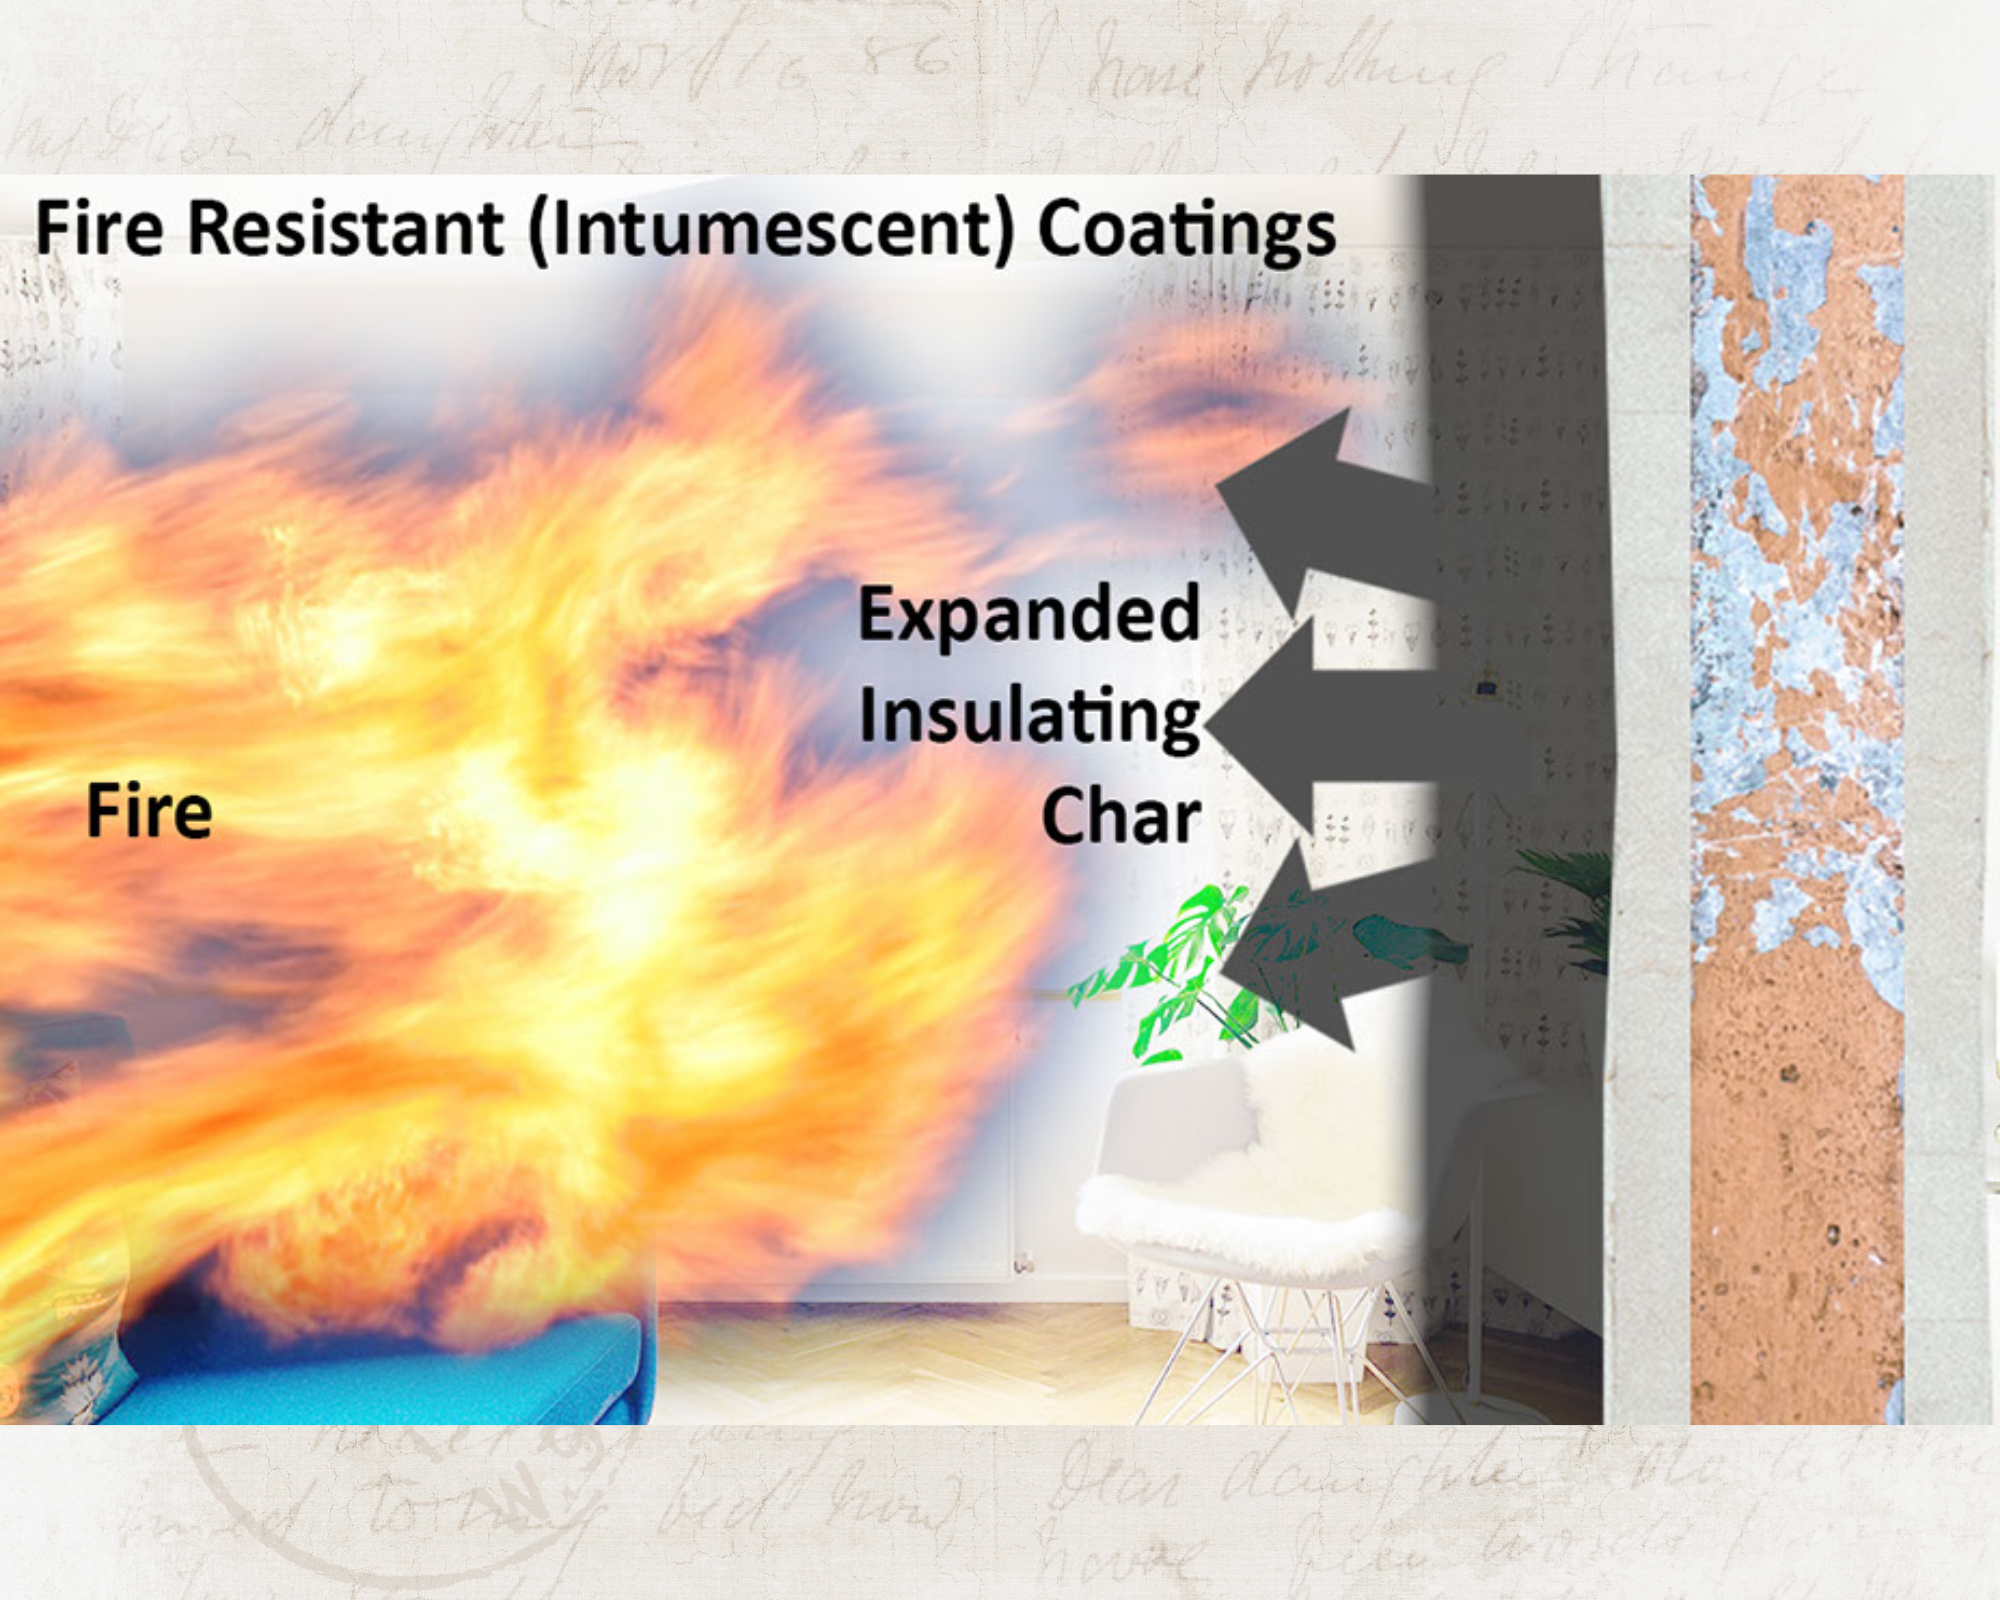 Coating and Painting Fire Protection: Harnessing the Synergistic Effects of Intumescent Flame Retardants